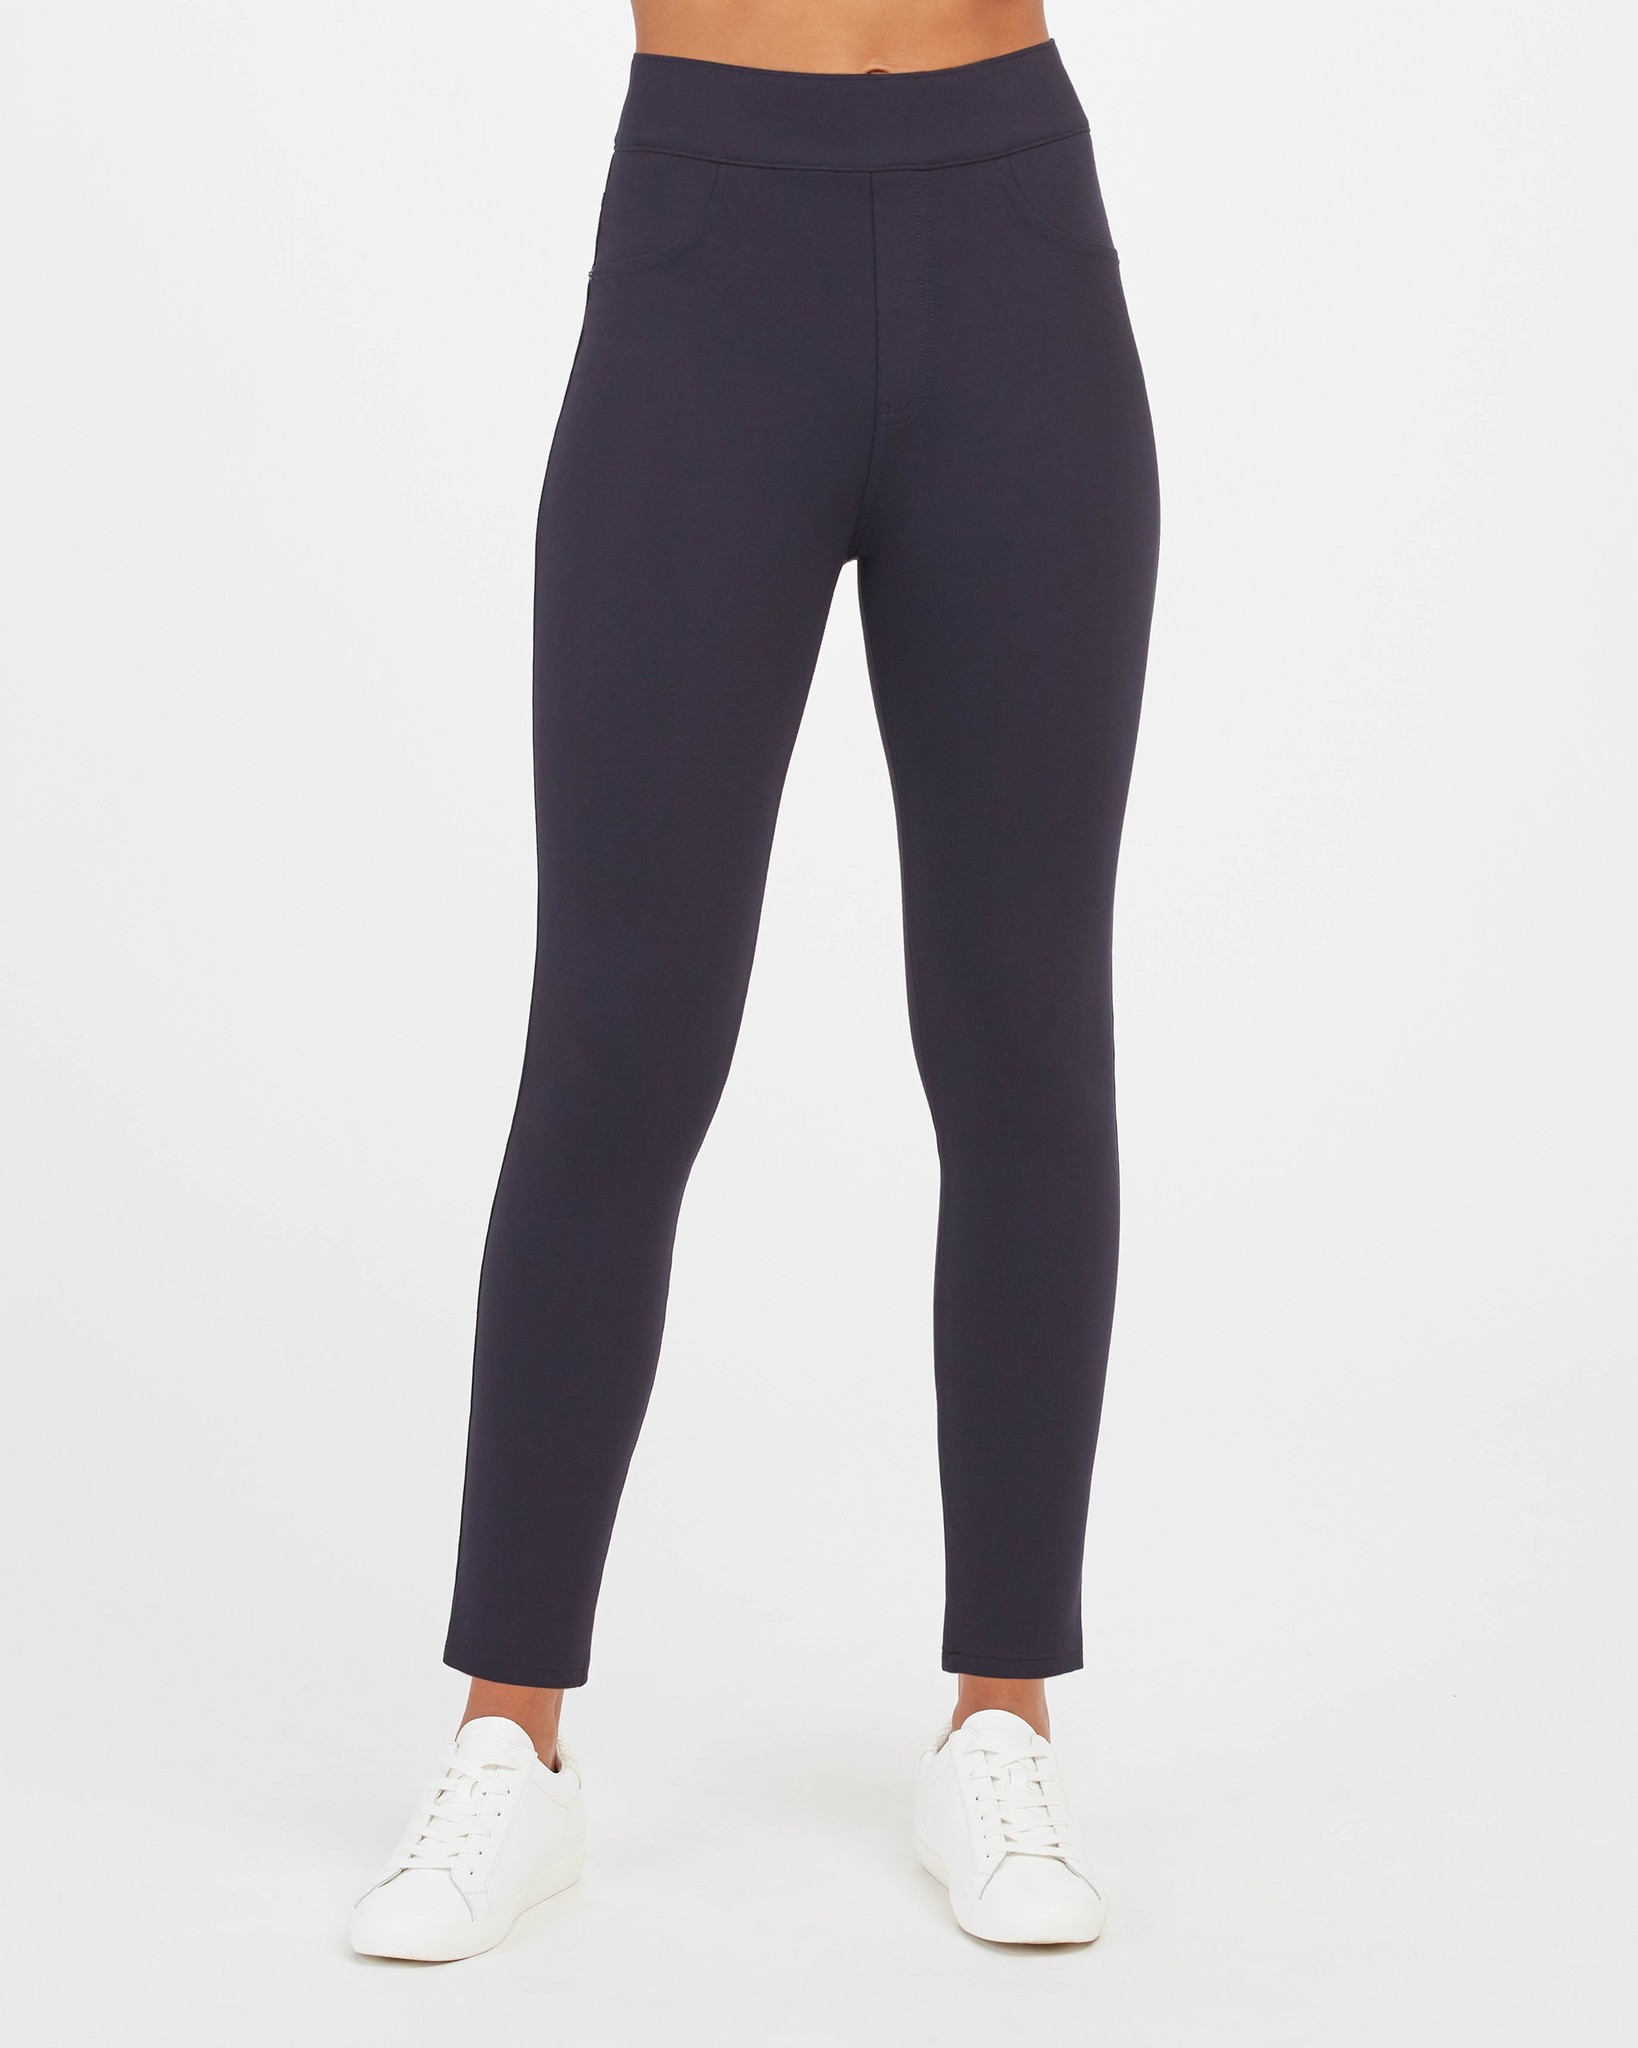 Savvy The Chic Ankle 4 - Pant Black Perfect Pocket Boutique